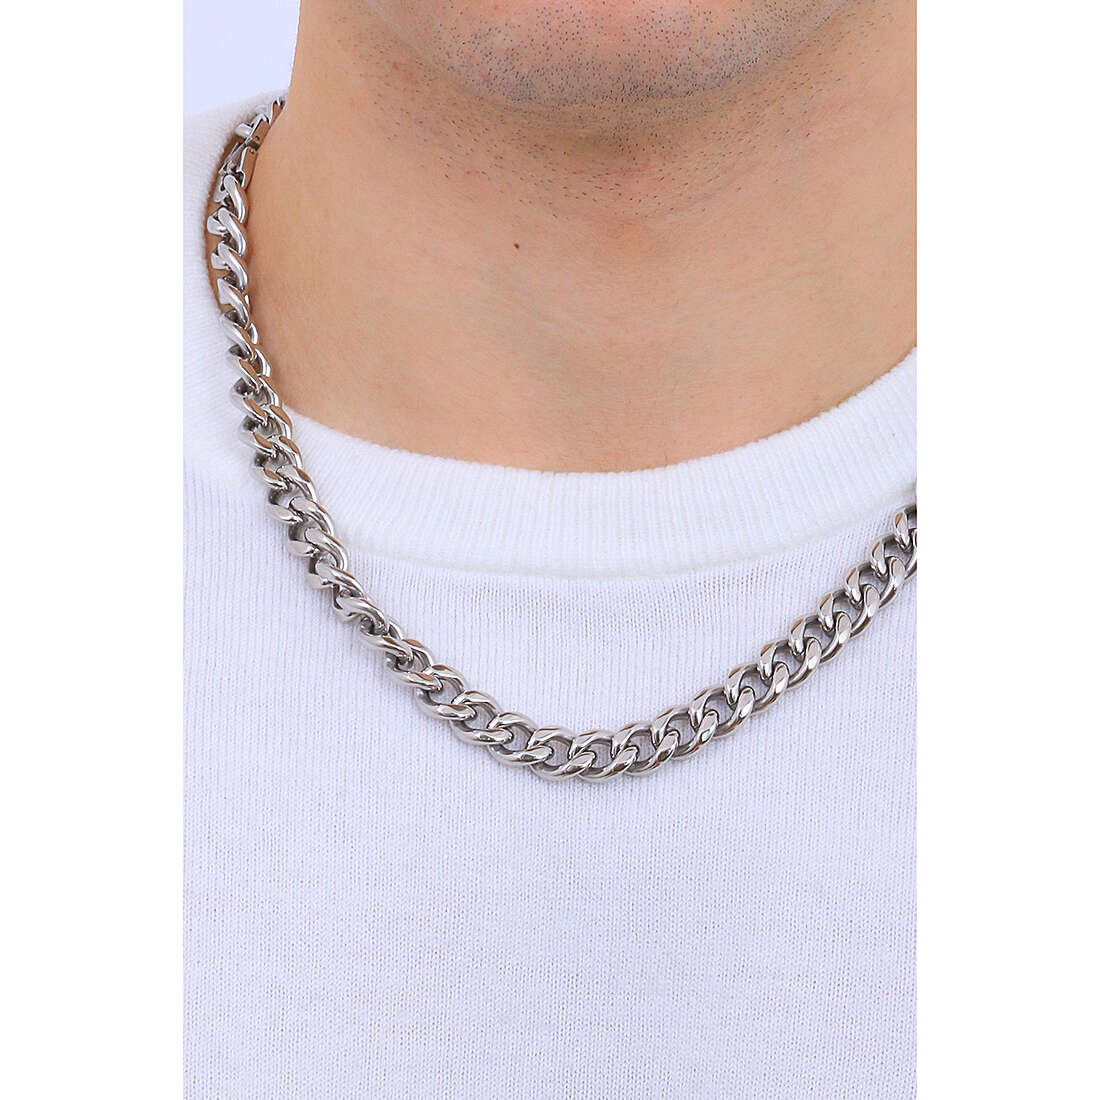 Luca Barra necklaces man CL242 wearing